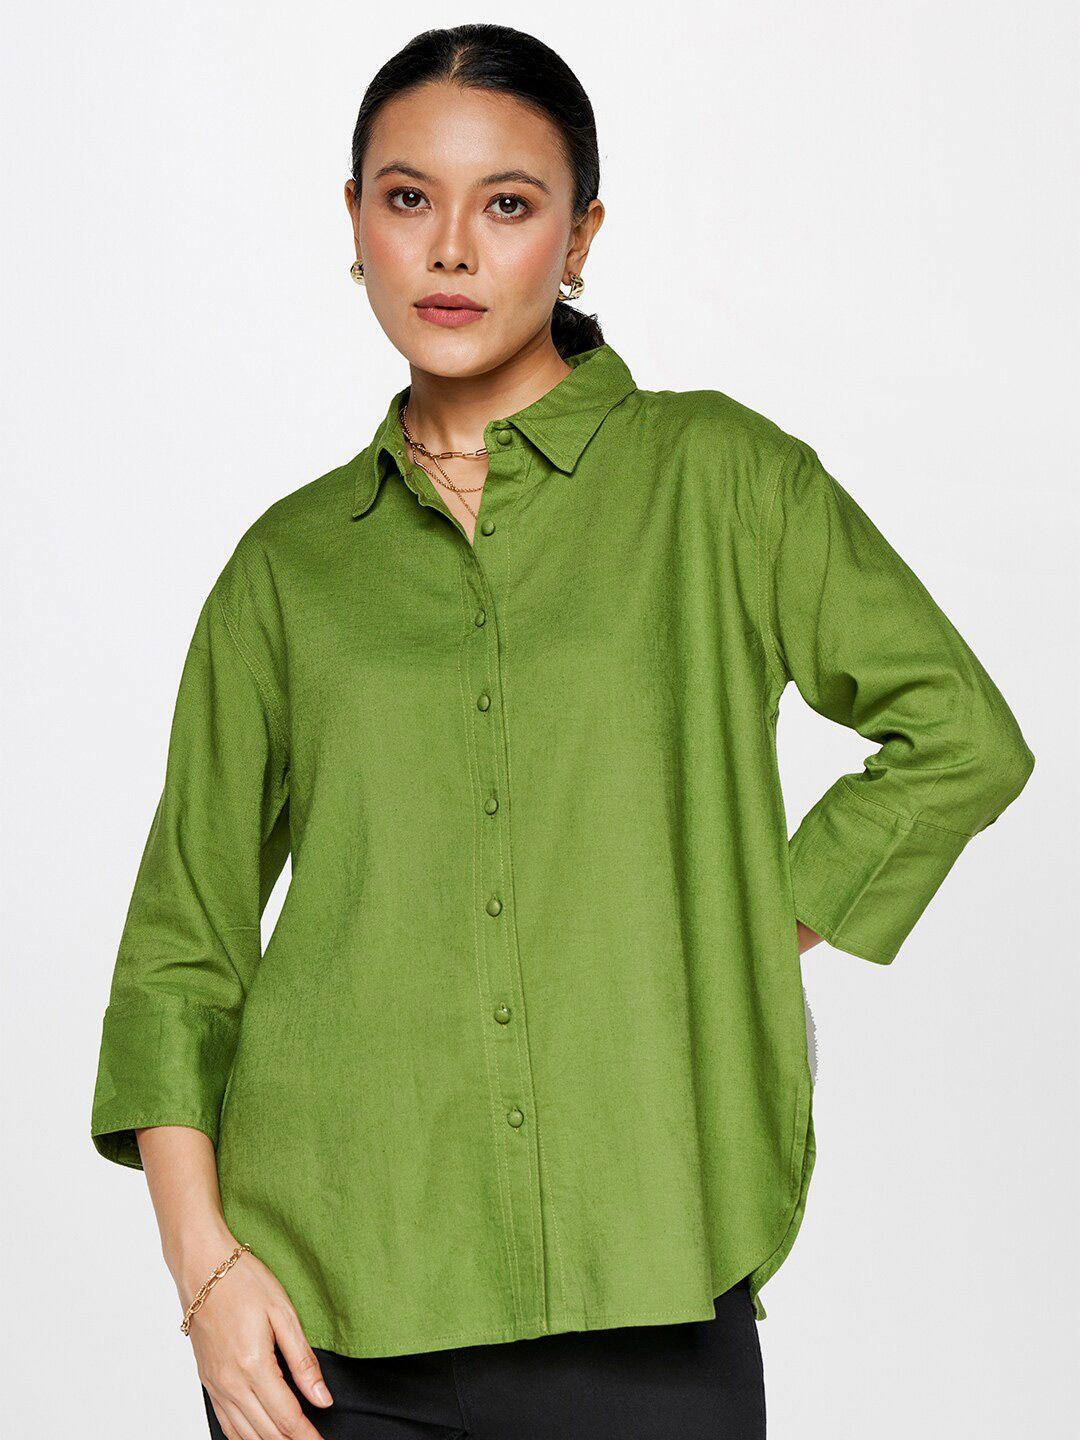 and cuffed sleeves shirt style top